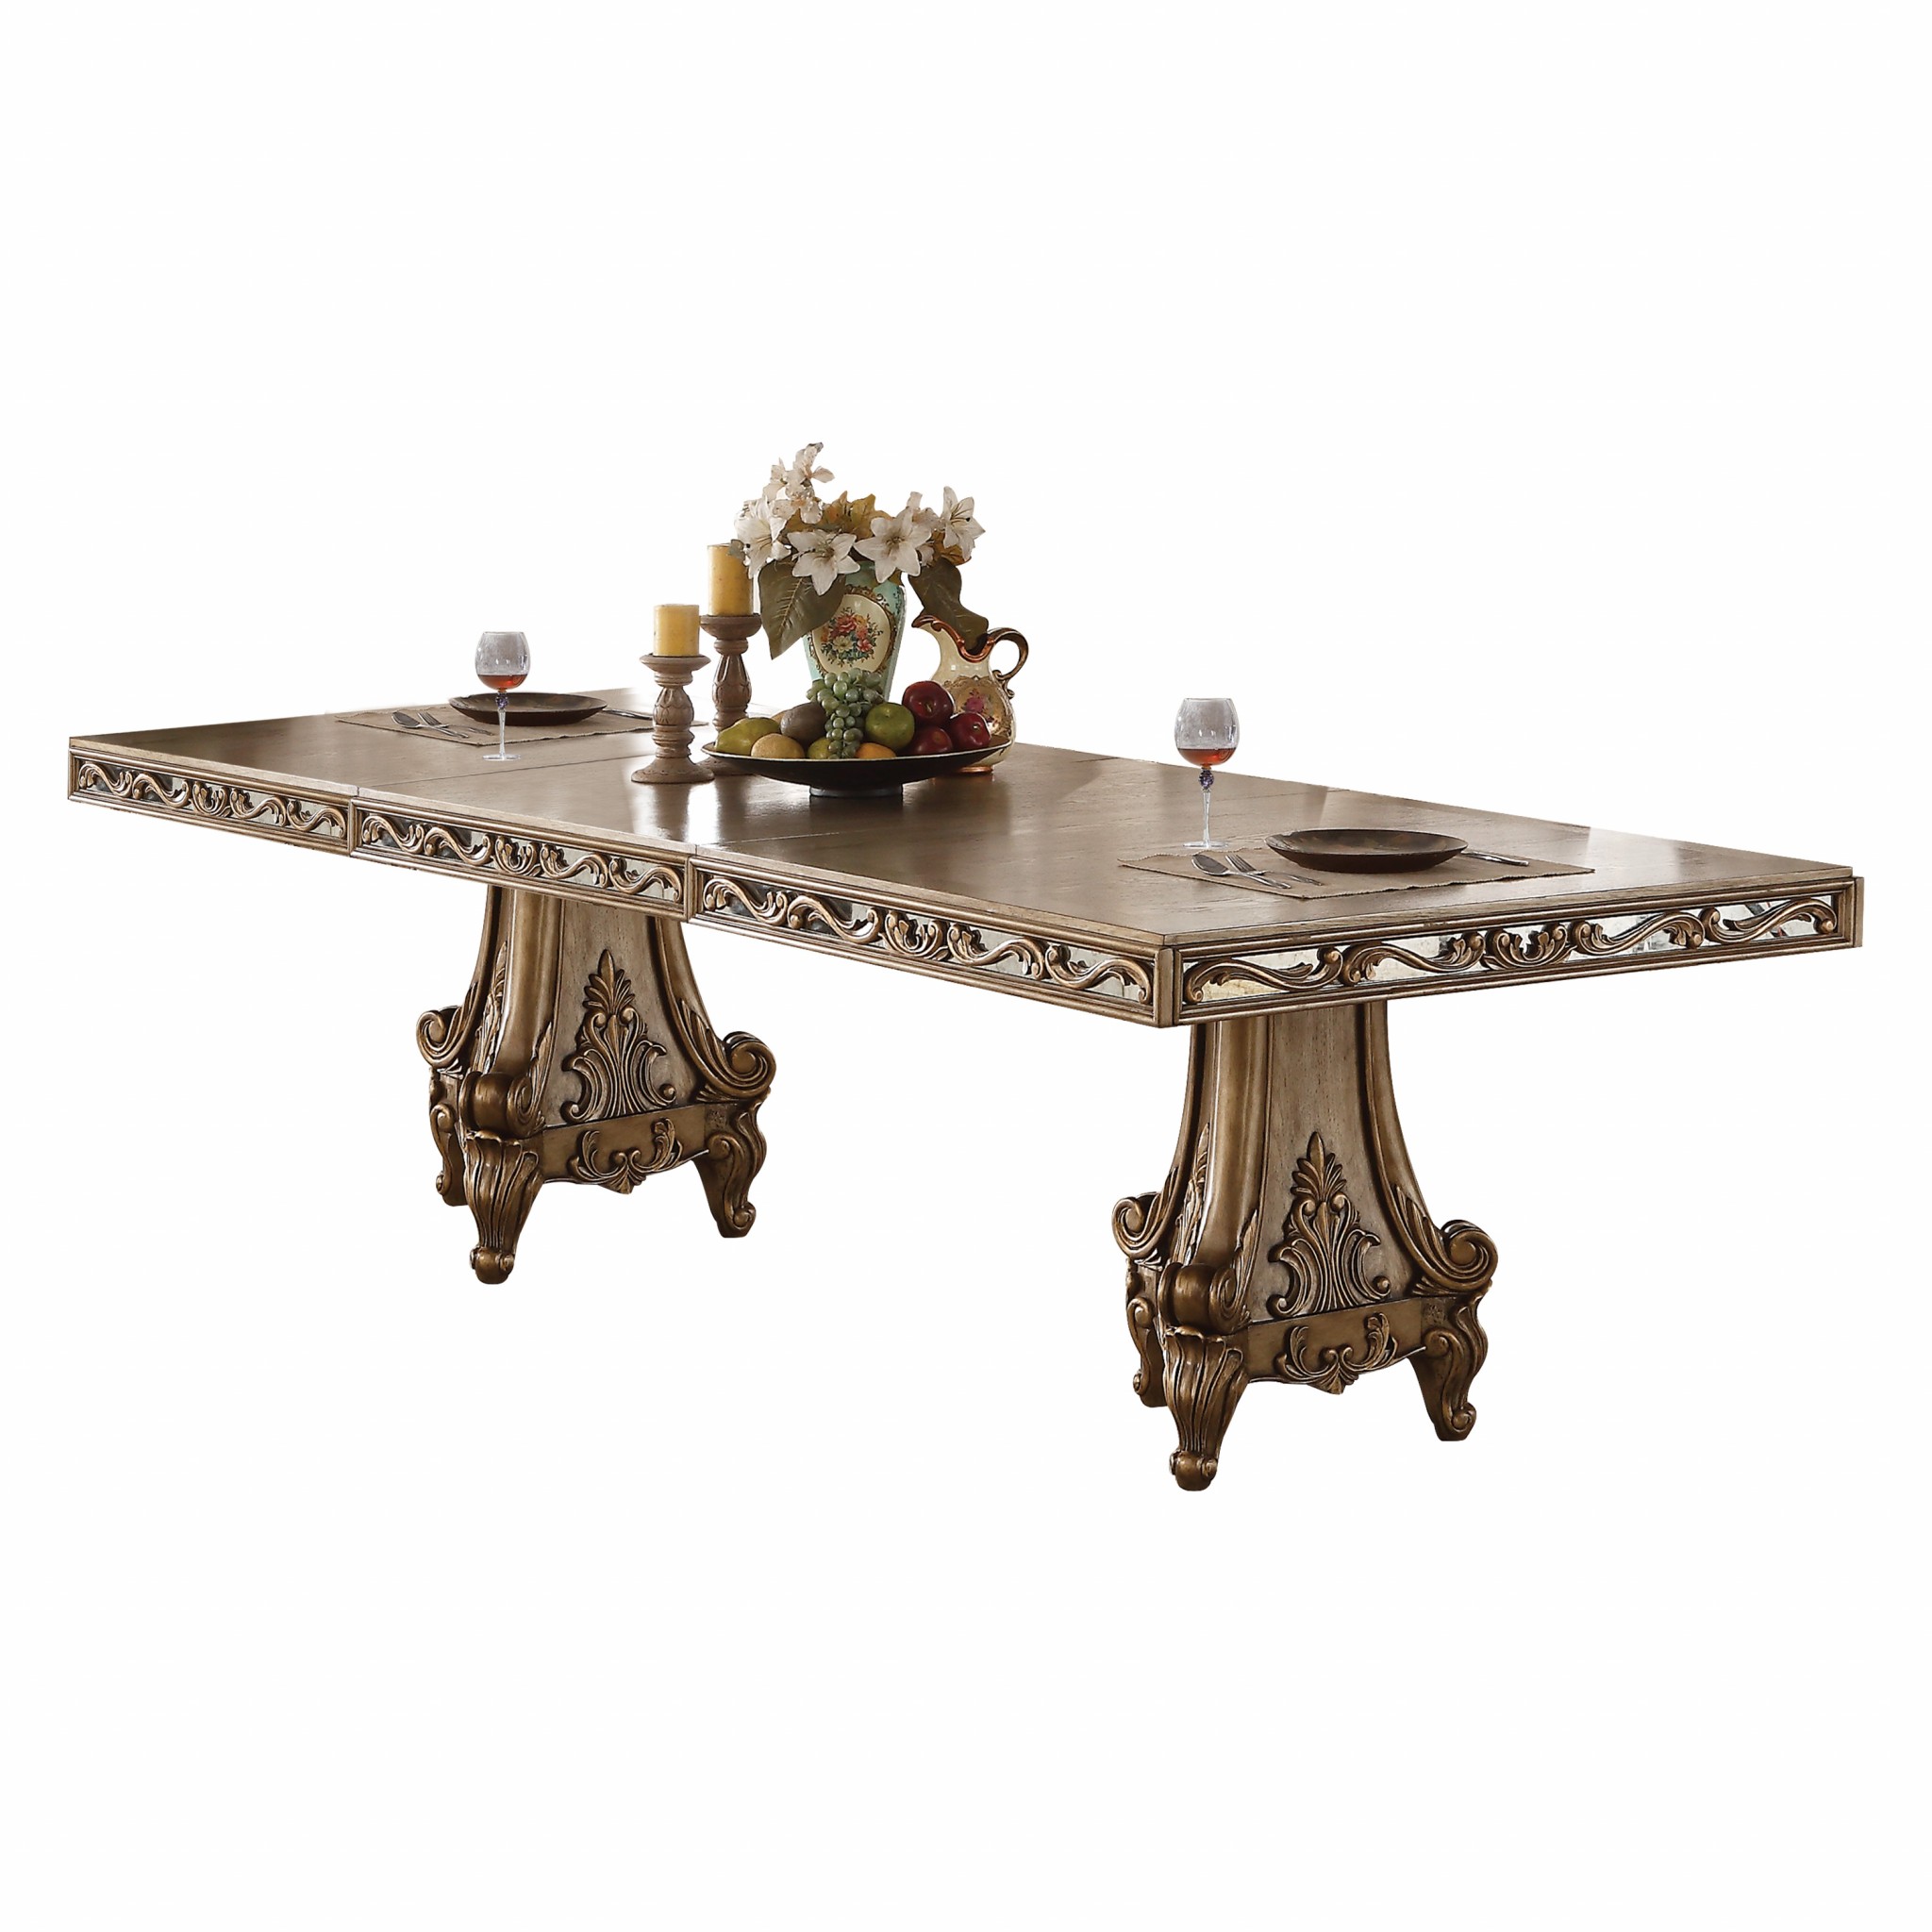 78-114" X 44" X 30" Antique Gold Dining Table